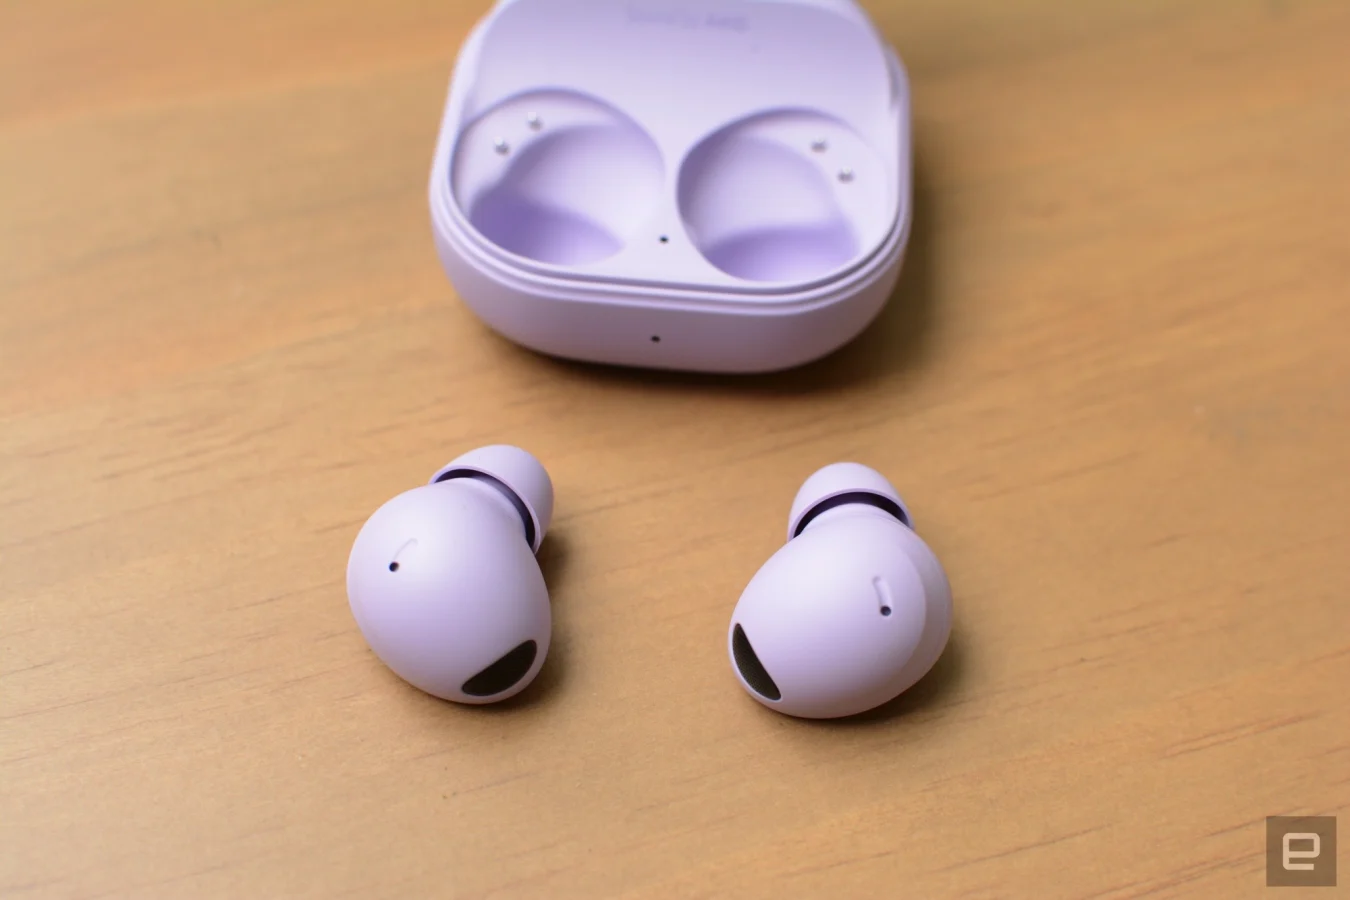 The Galaxy Buds 2 Pro are Samsung’s best earbuds yet, and it’s not even close. Thanks to a huge improvement to sound quality, better noise cancellation and a host of handy features, this is the most well-rounded true wireless product from the company so far. But even with all of its gains, the best is still reserved for the Samsung faithful, which means these are only a truly great option for owner’s of one of the company’s devices. 